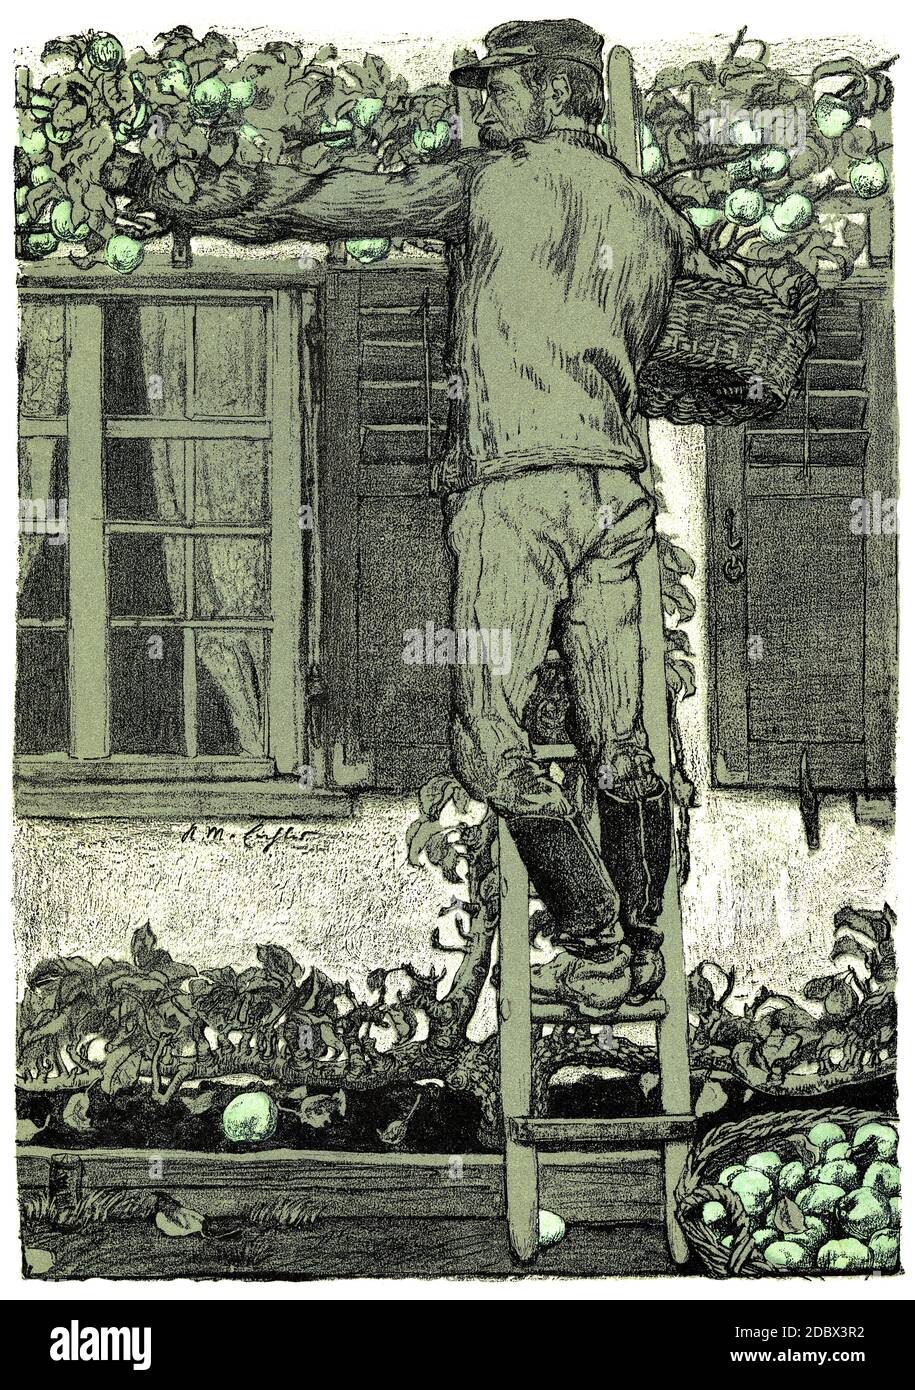 A Good Year - apple-picker on a ladder from vintage illustration, Art Nouveau style Stock Photo